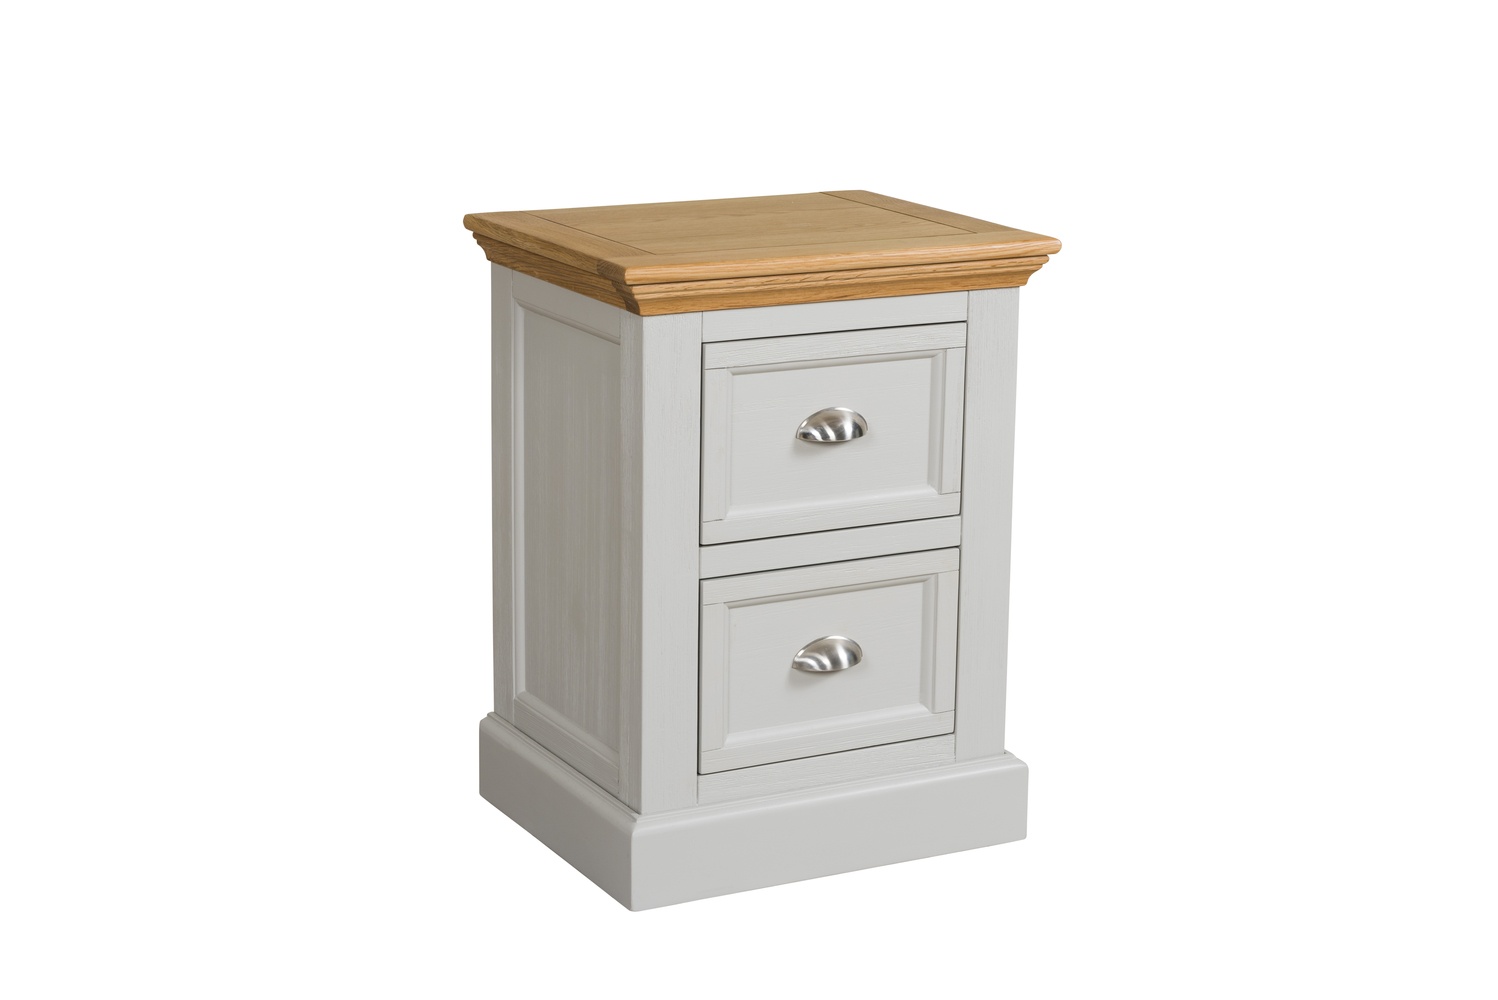 Bedsides & Wooden Bedside Tables - Creations Interiors Northern Ireland